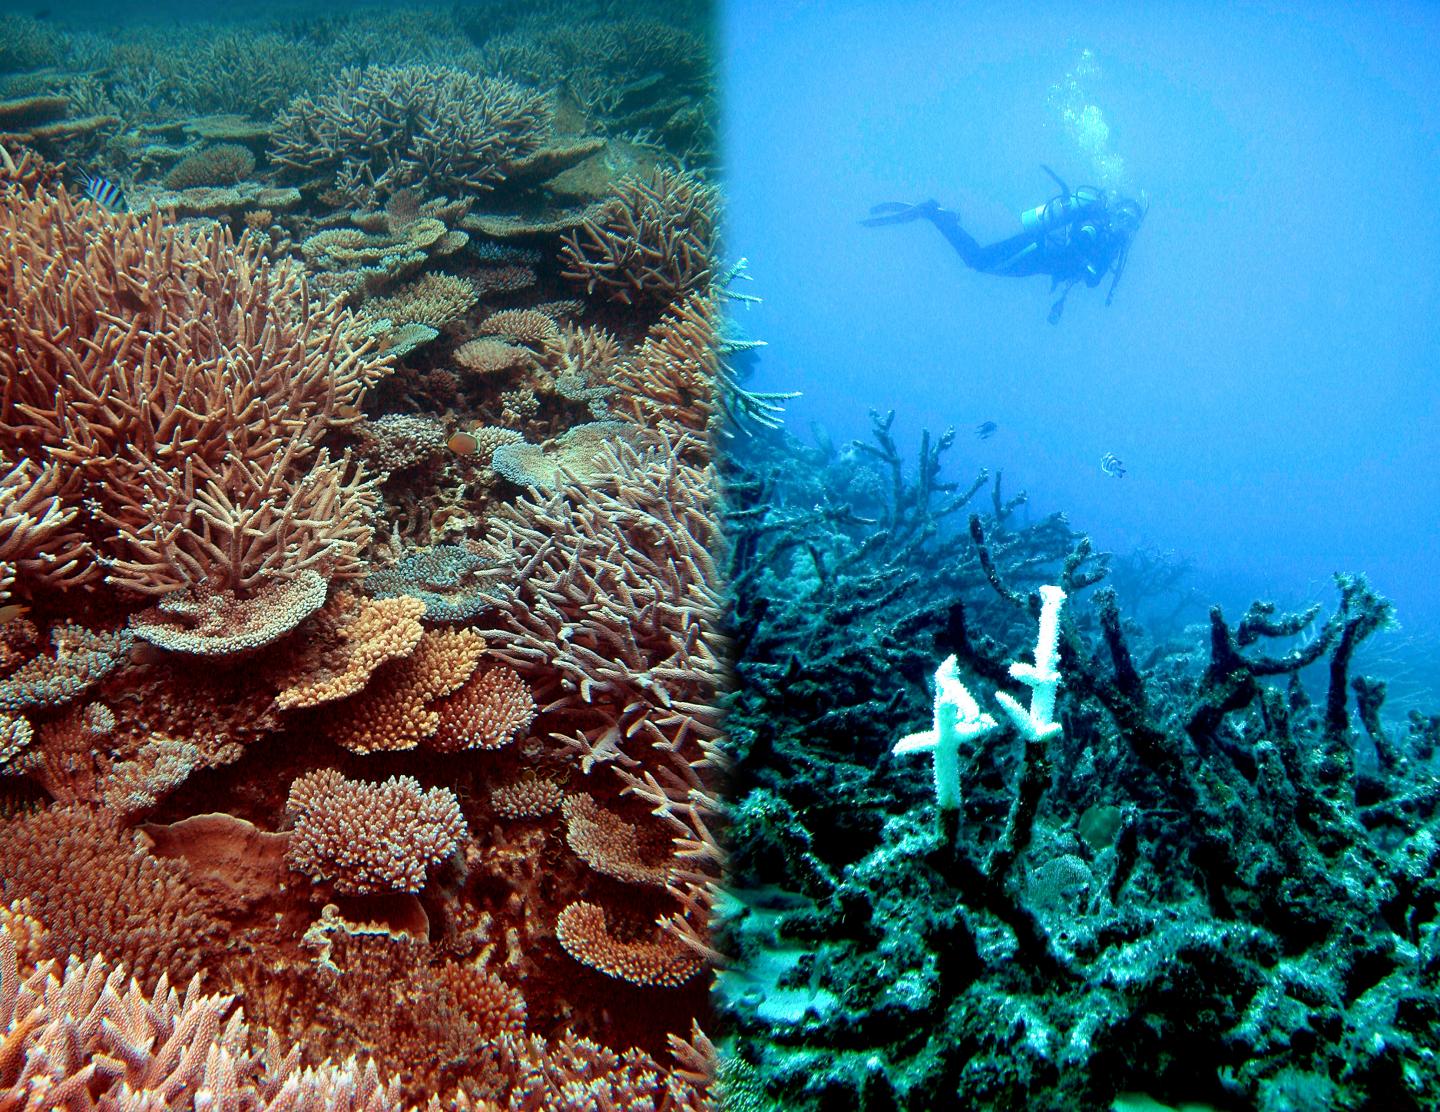 Healthy and Degraded Coral Reefs